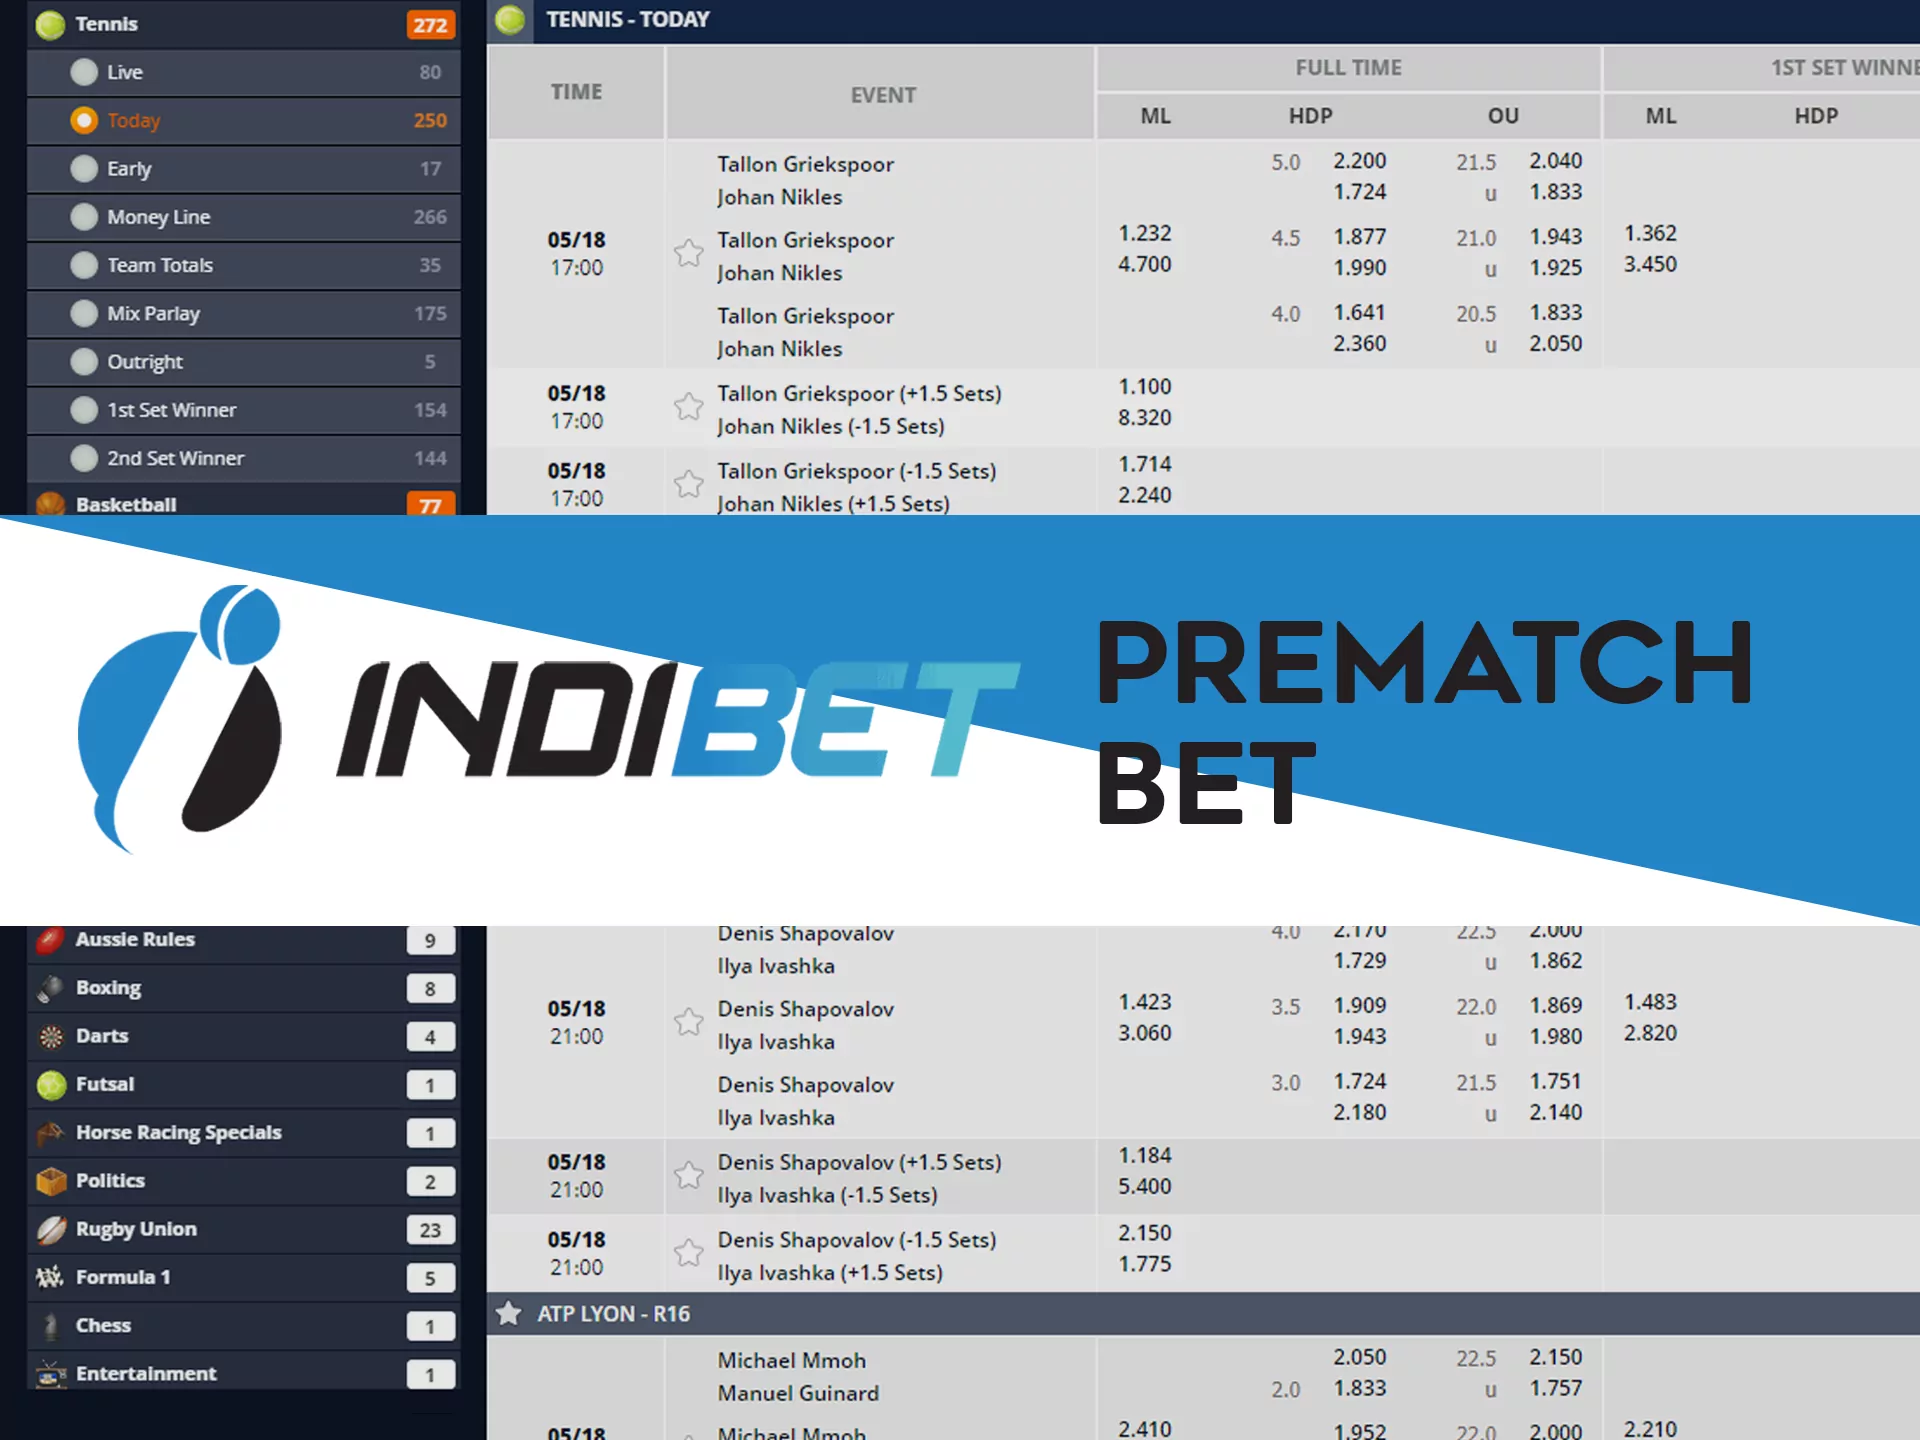 Place bets at Indibet before the match starts.